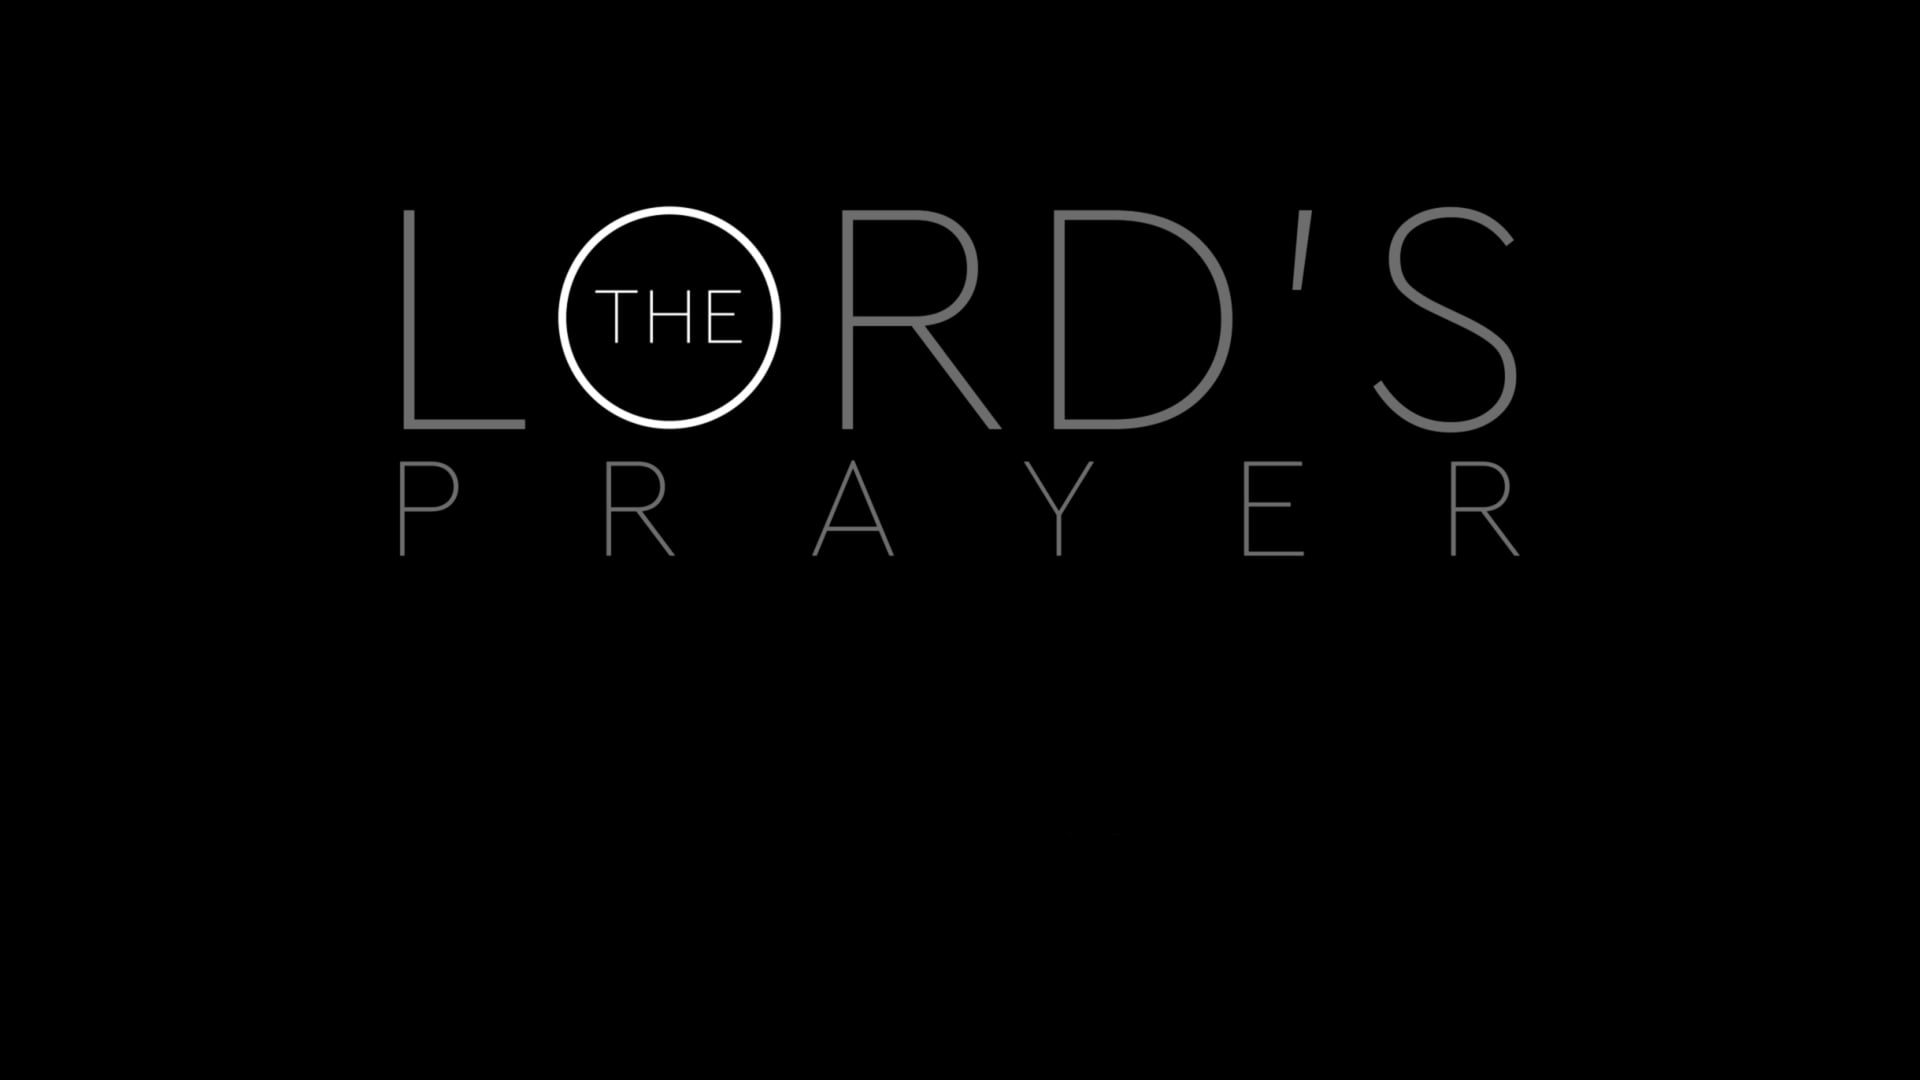 THE LORDS PRAYER